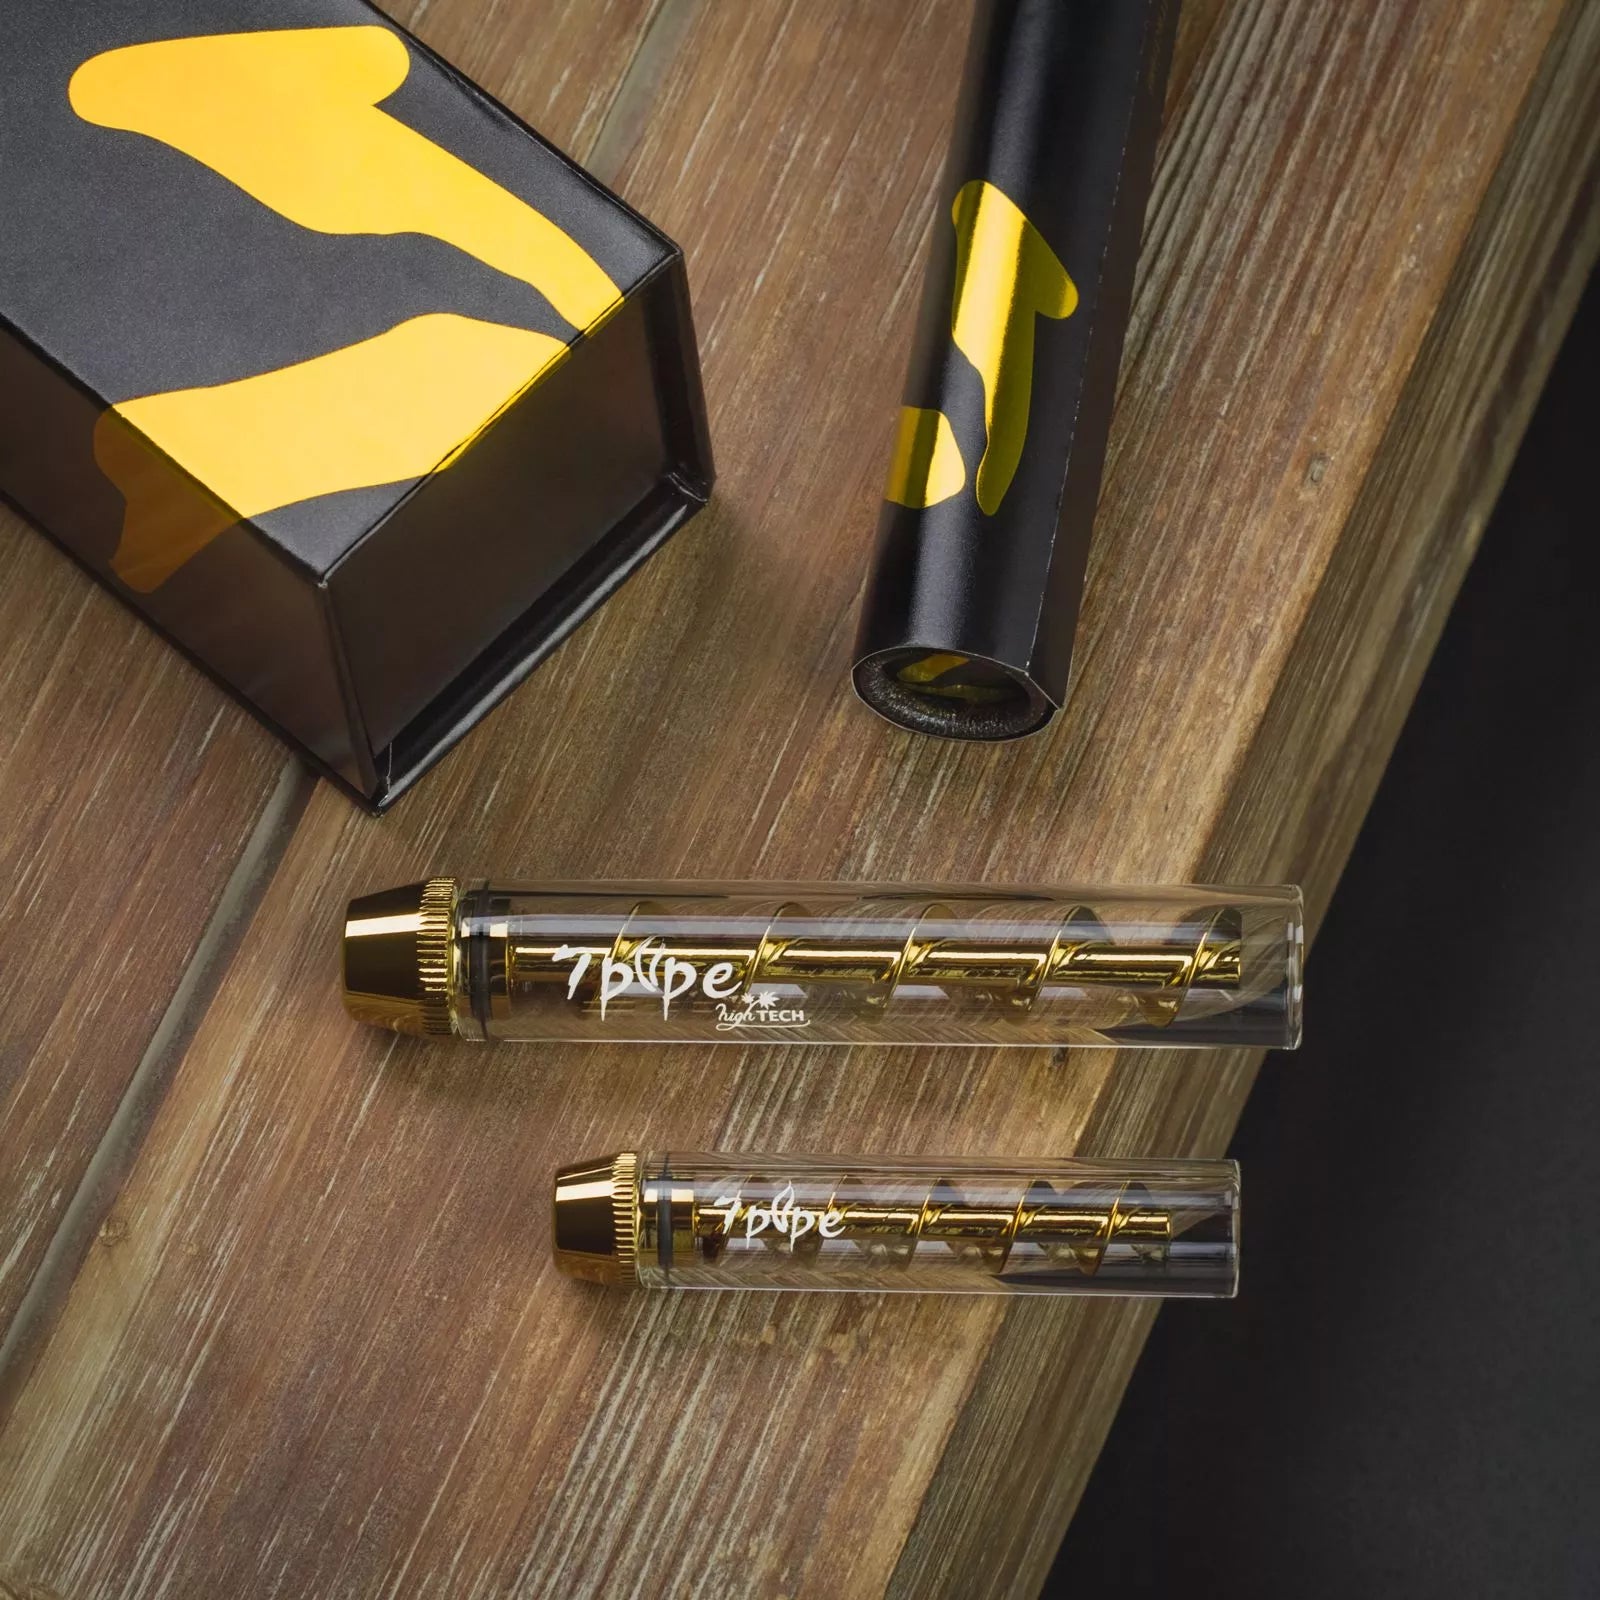 Twisty Glass Blunt Review - Enjoy a Paperless Smoking Experience